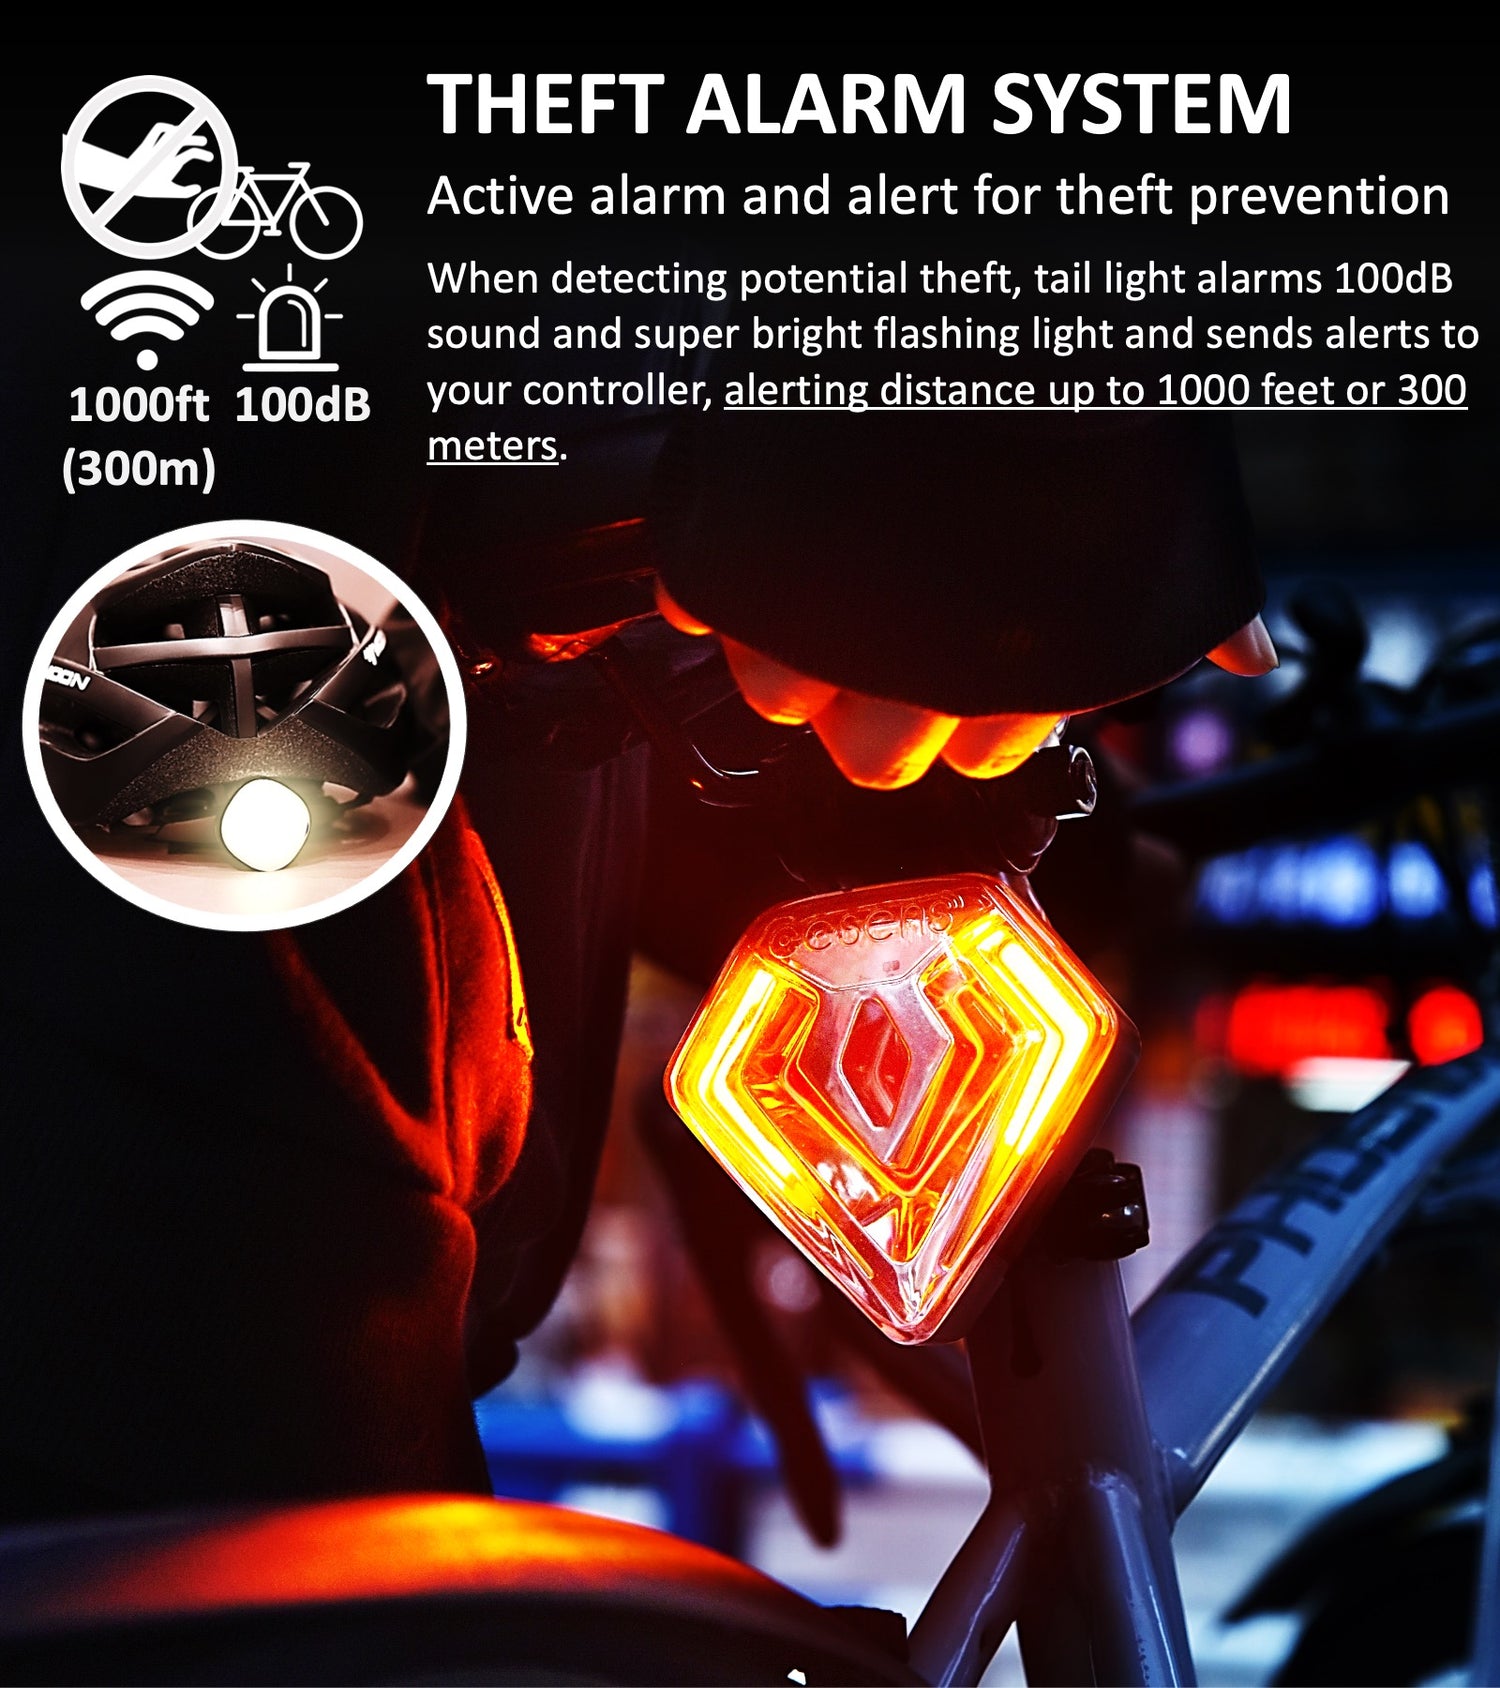 SHIELD Smart Bike Tail Light with Theft Alarm System